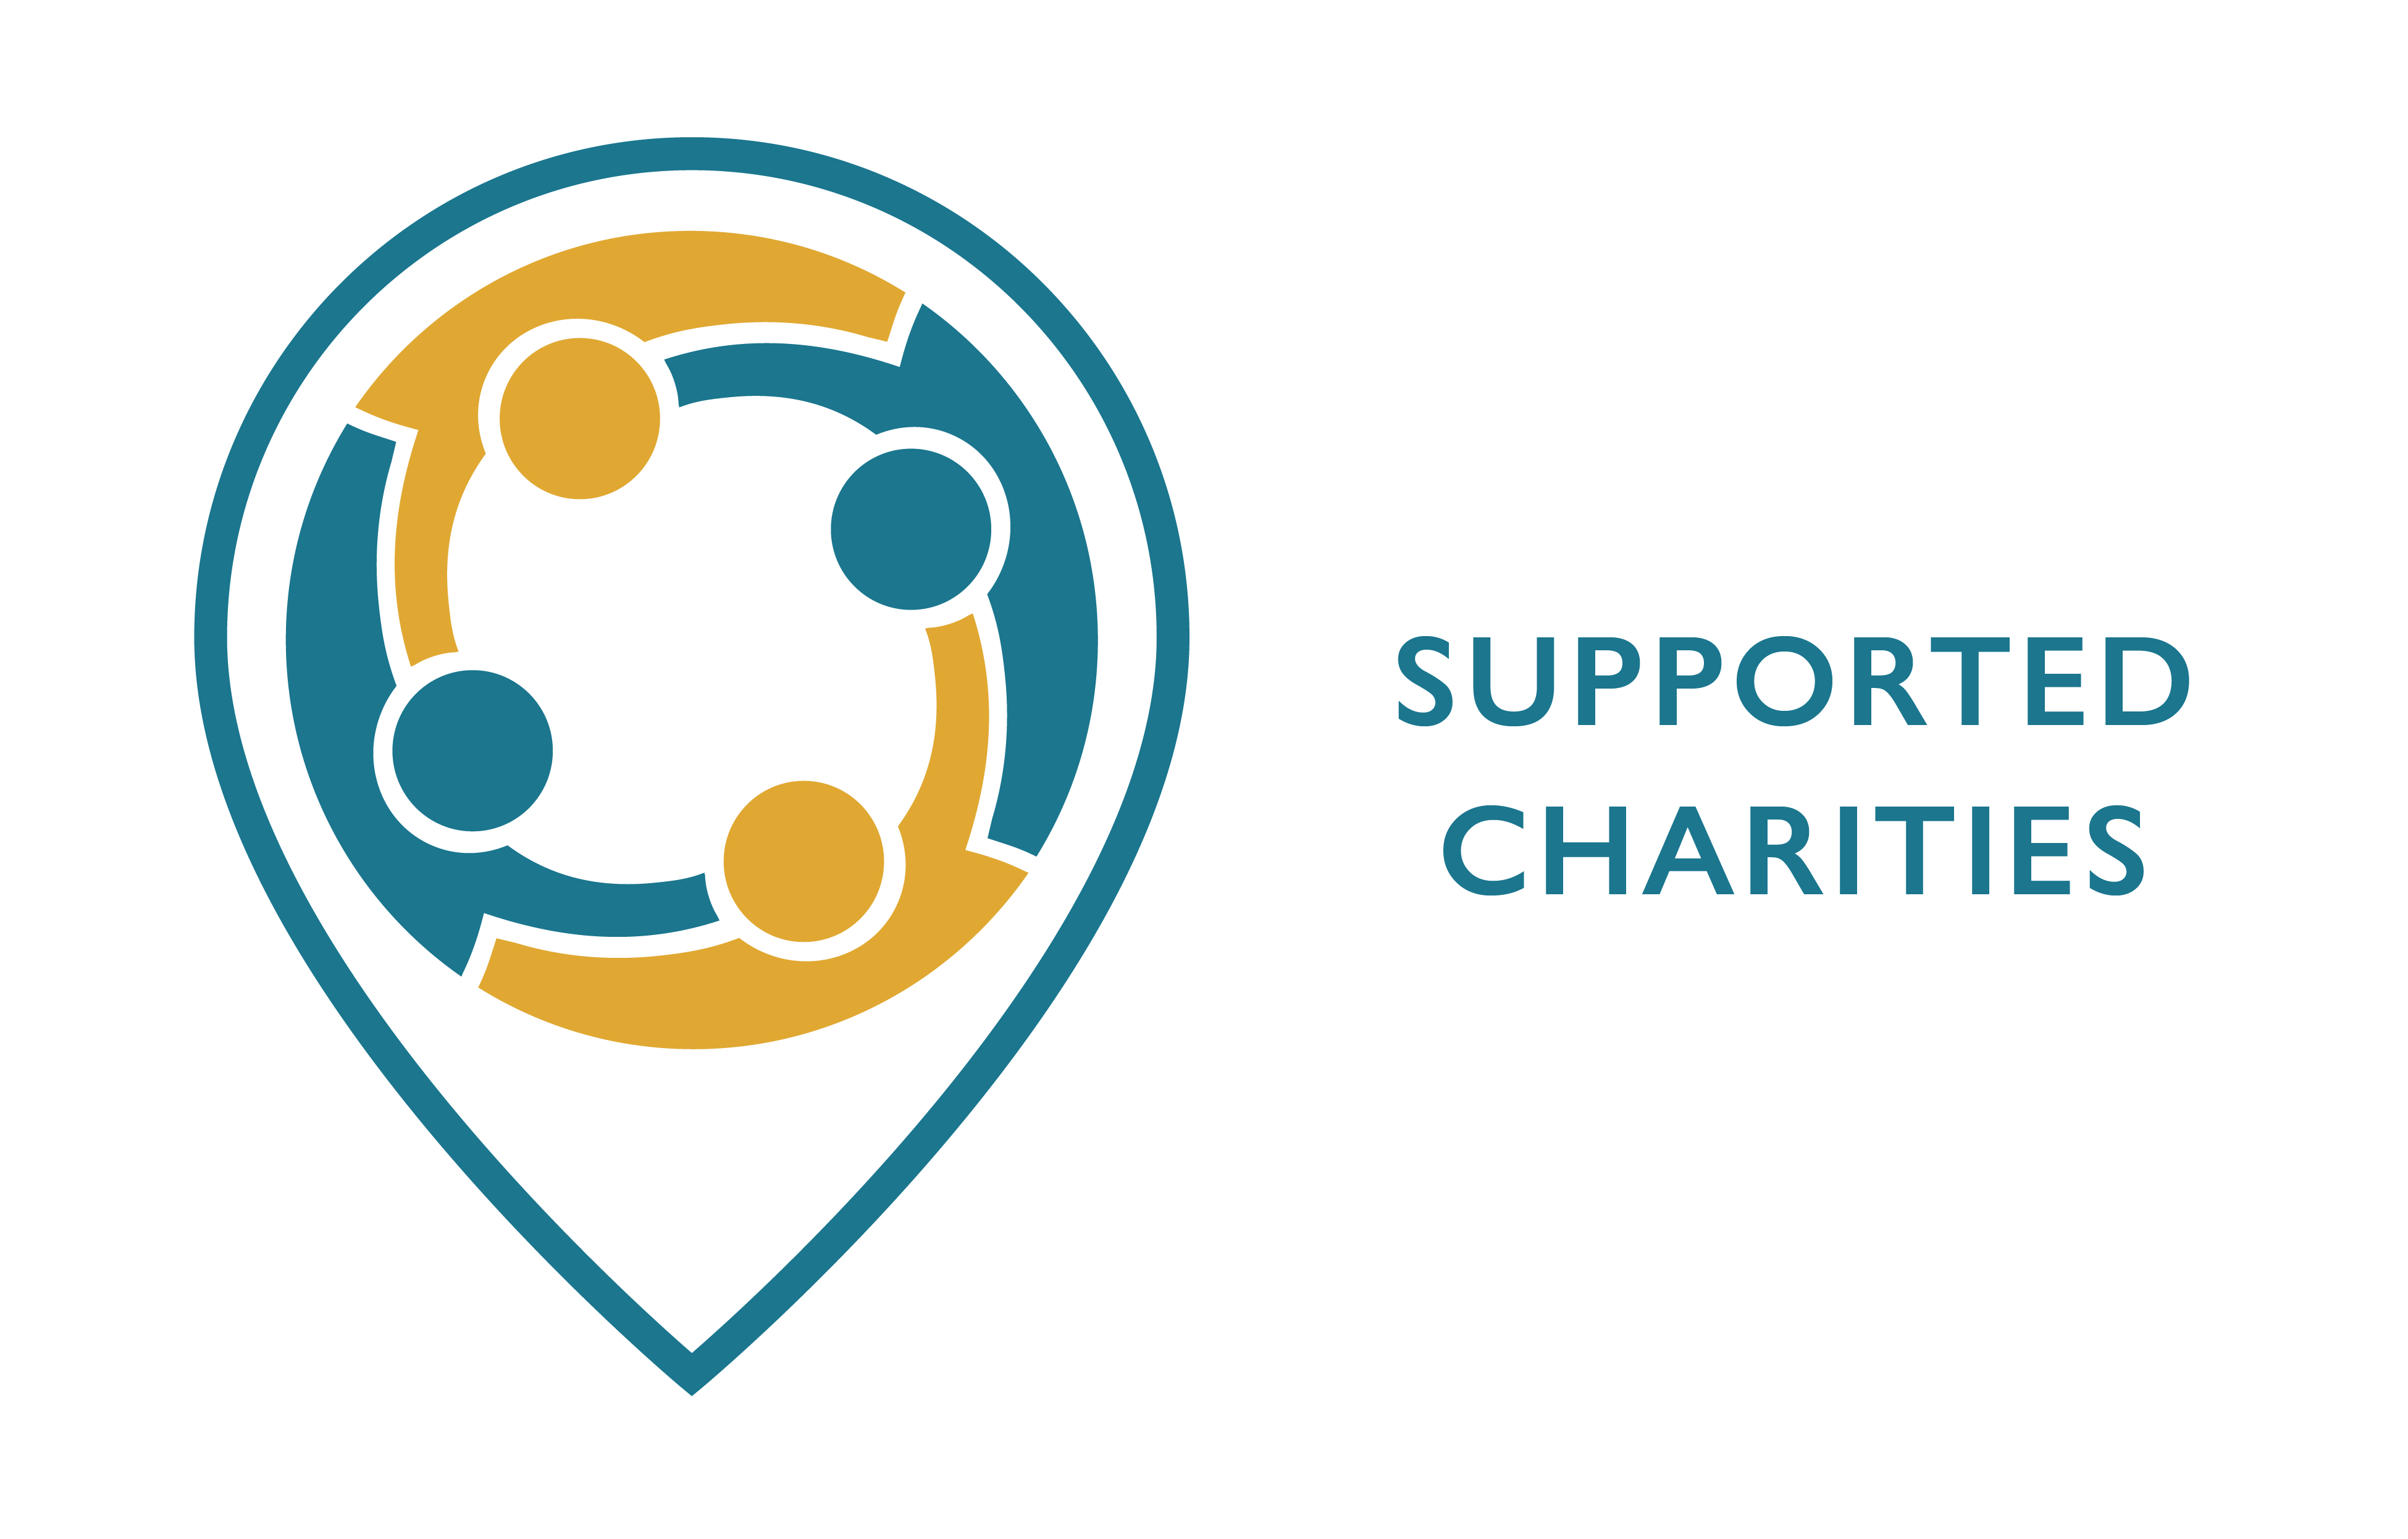 Supported charities symbol